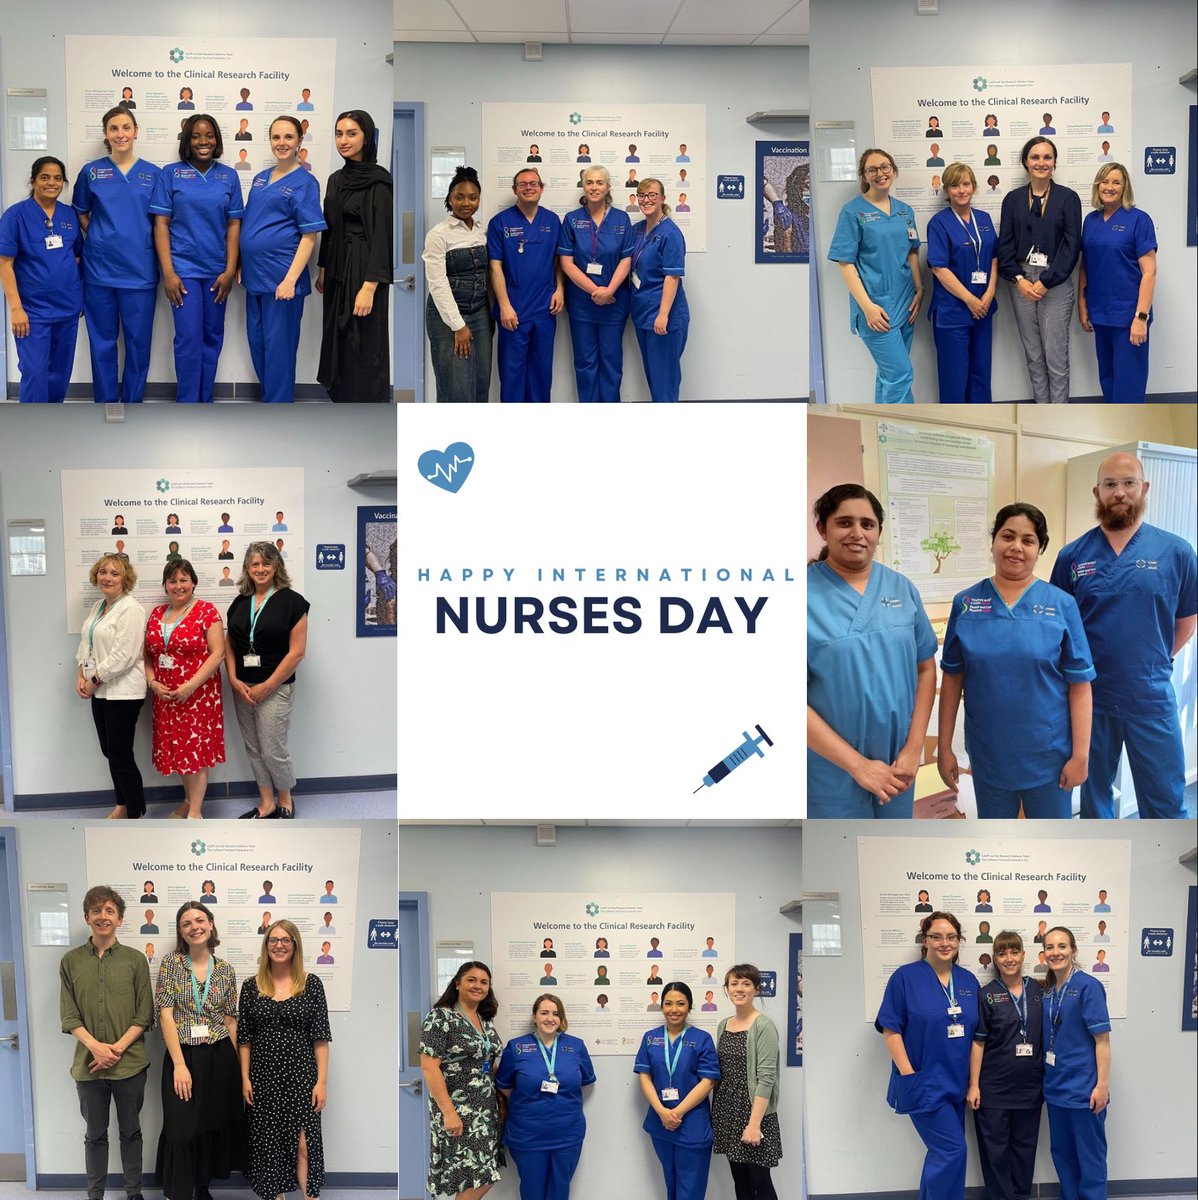 Happy international nurses day to all nurses everywhere. We are proud to be a nurses @CV_UHB @ResearchWales